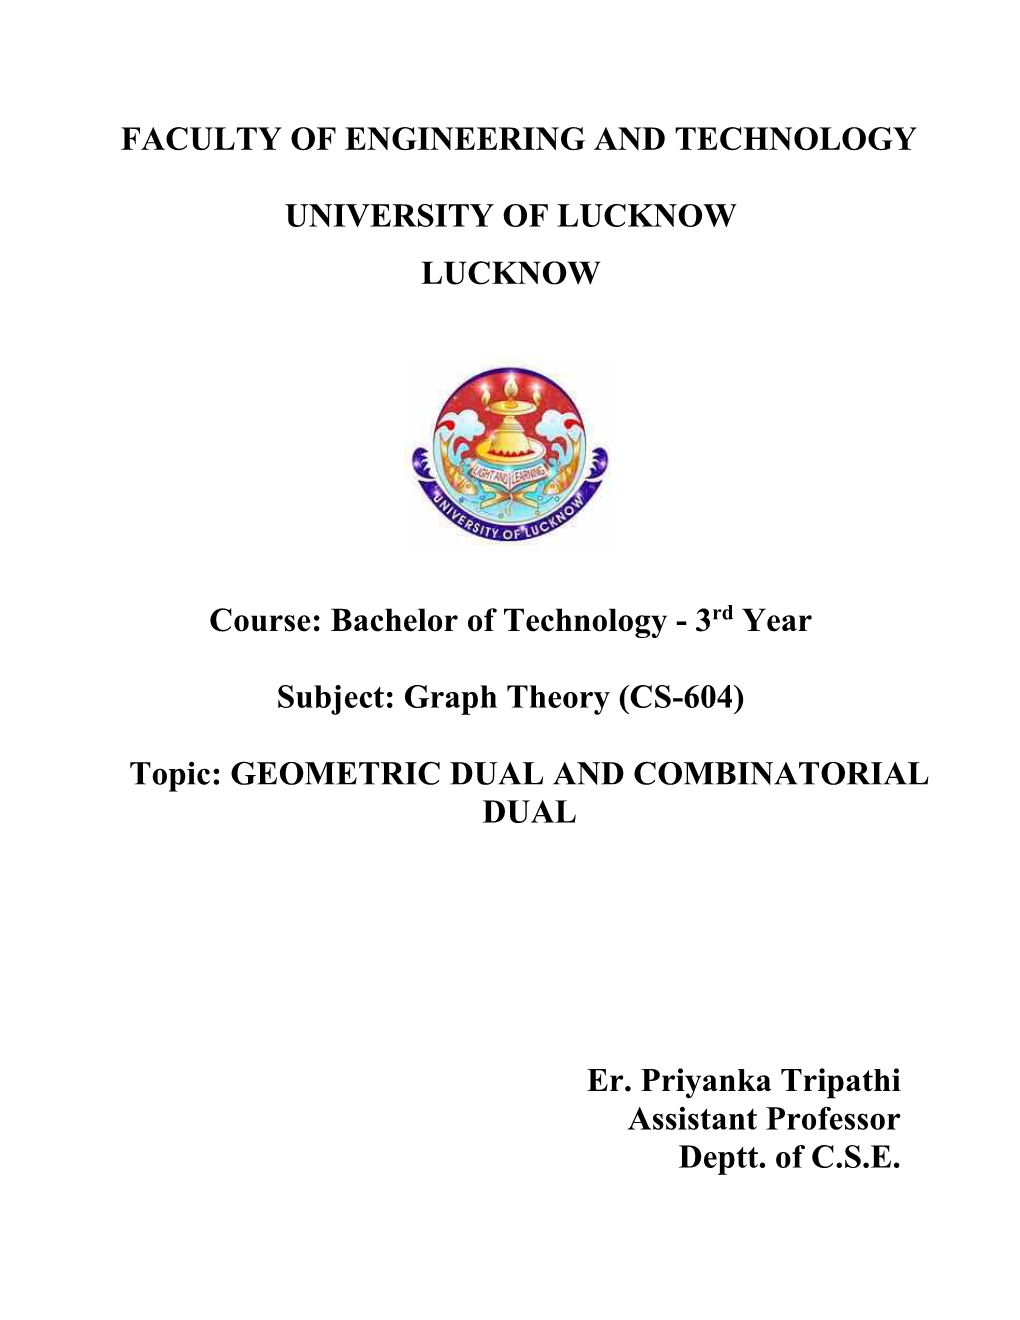 Bachelor of Technology - 3Rd Year